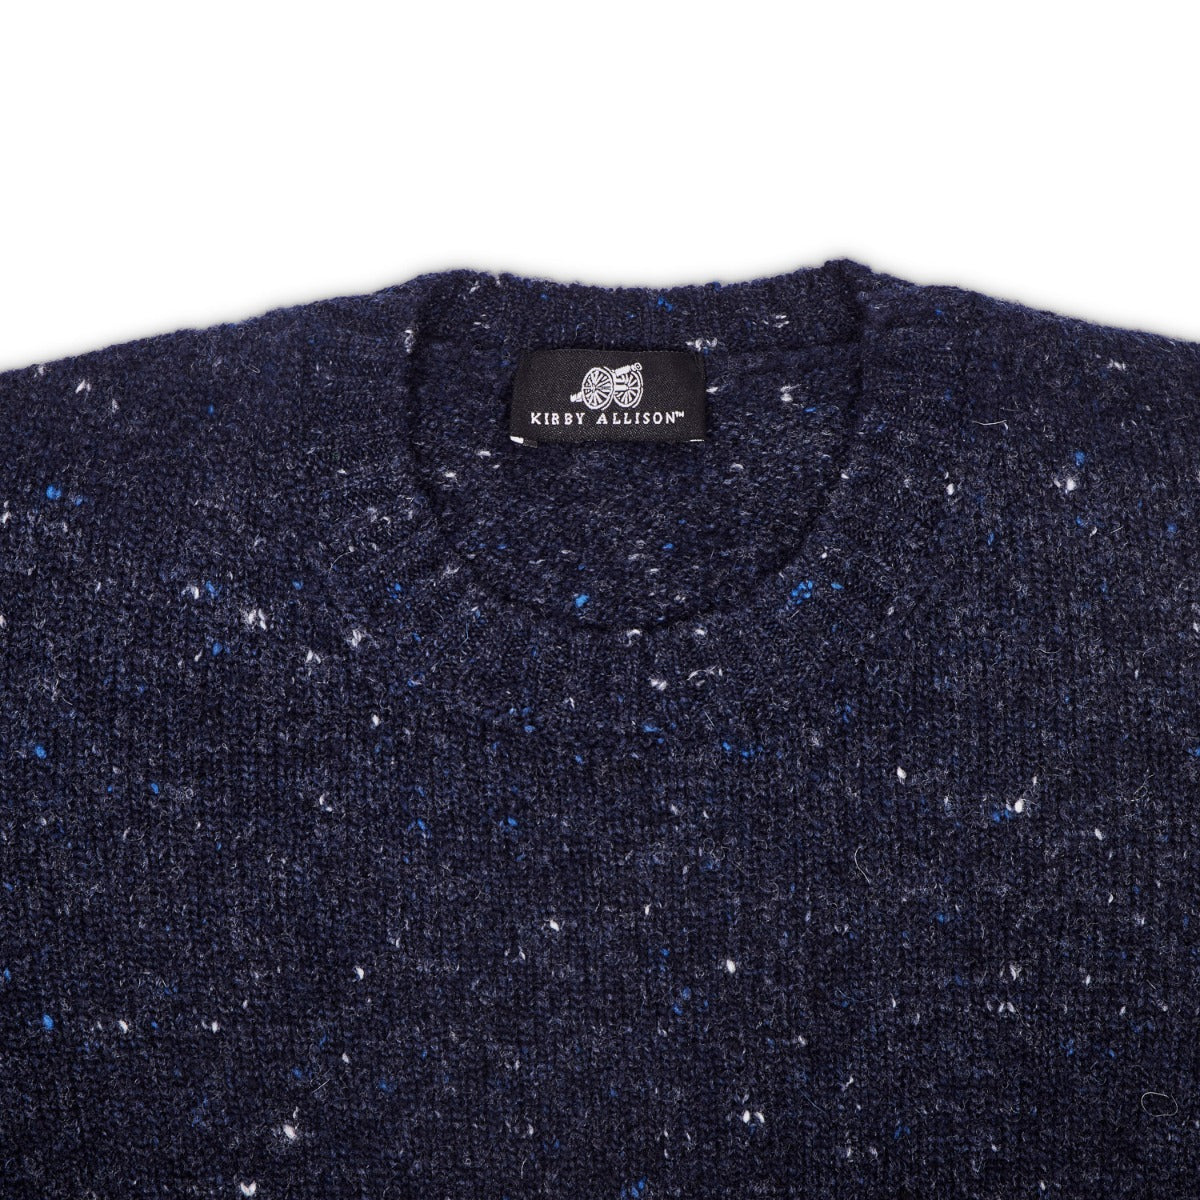 A Sovereign Grade Blue Donegal Crew Neck Sweater with blue and white speckles from KirbyAllison.com.